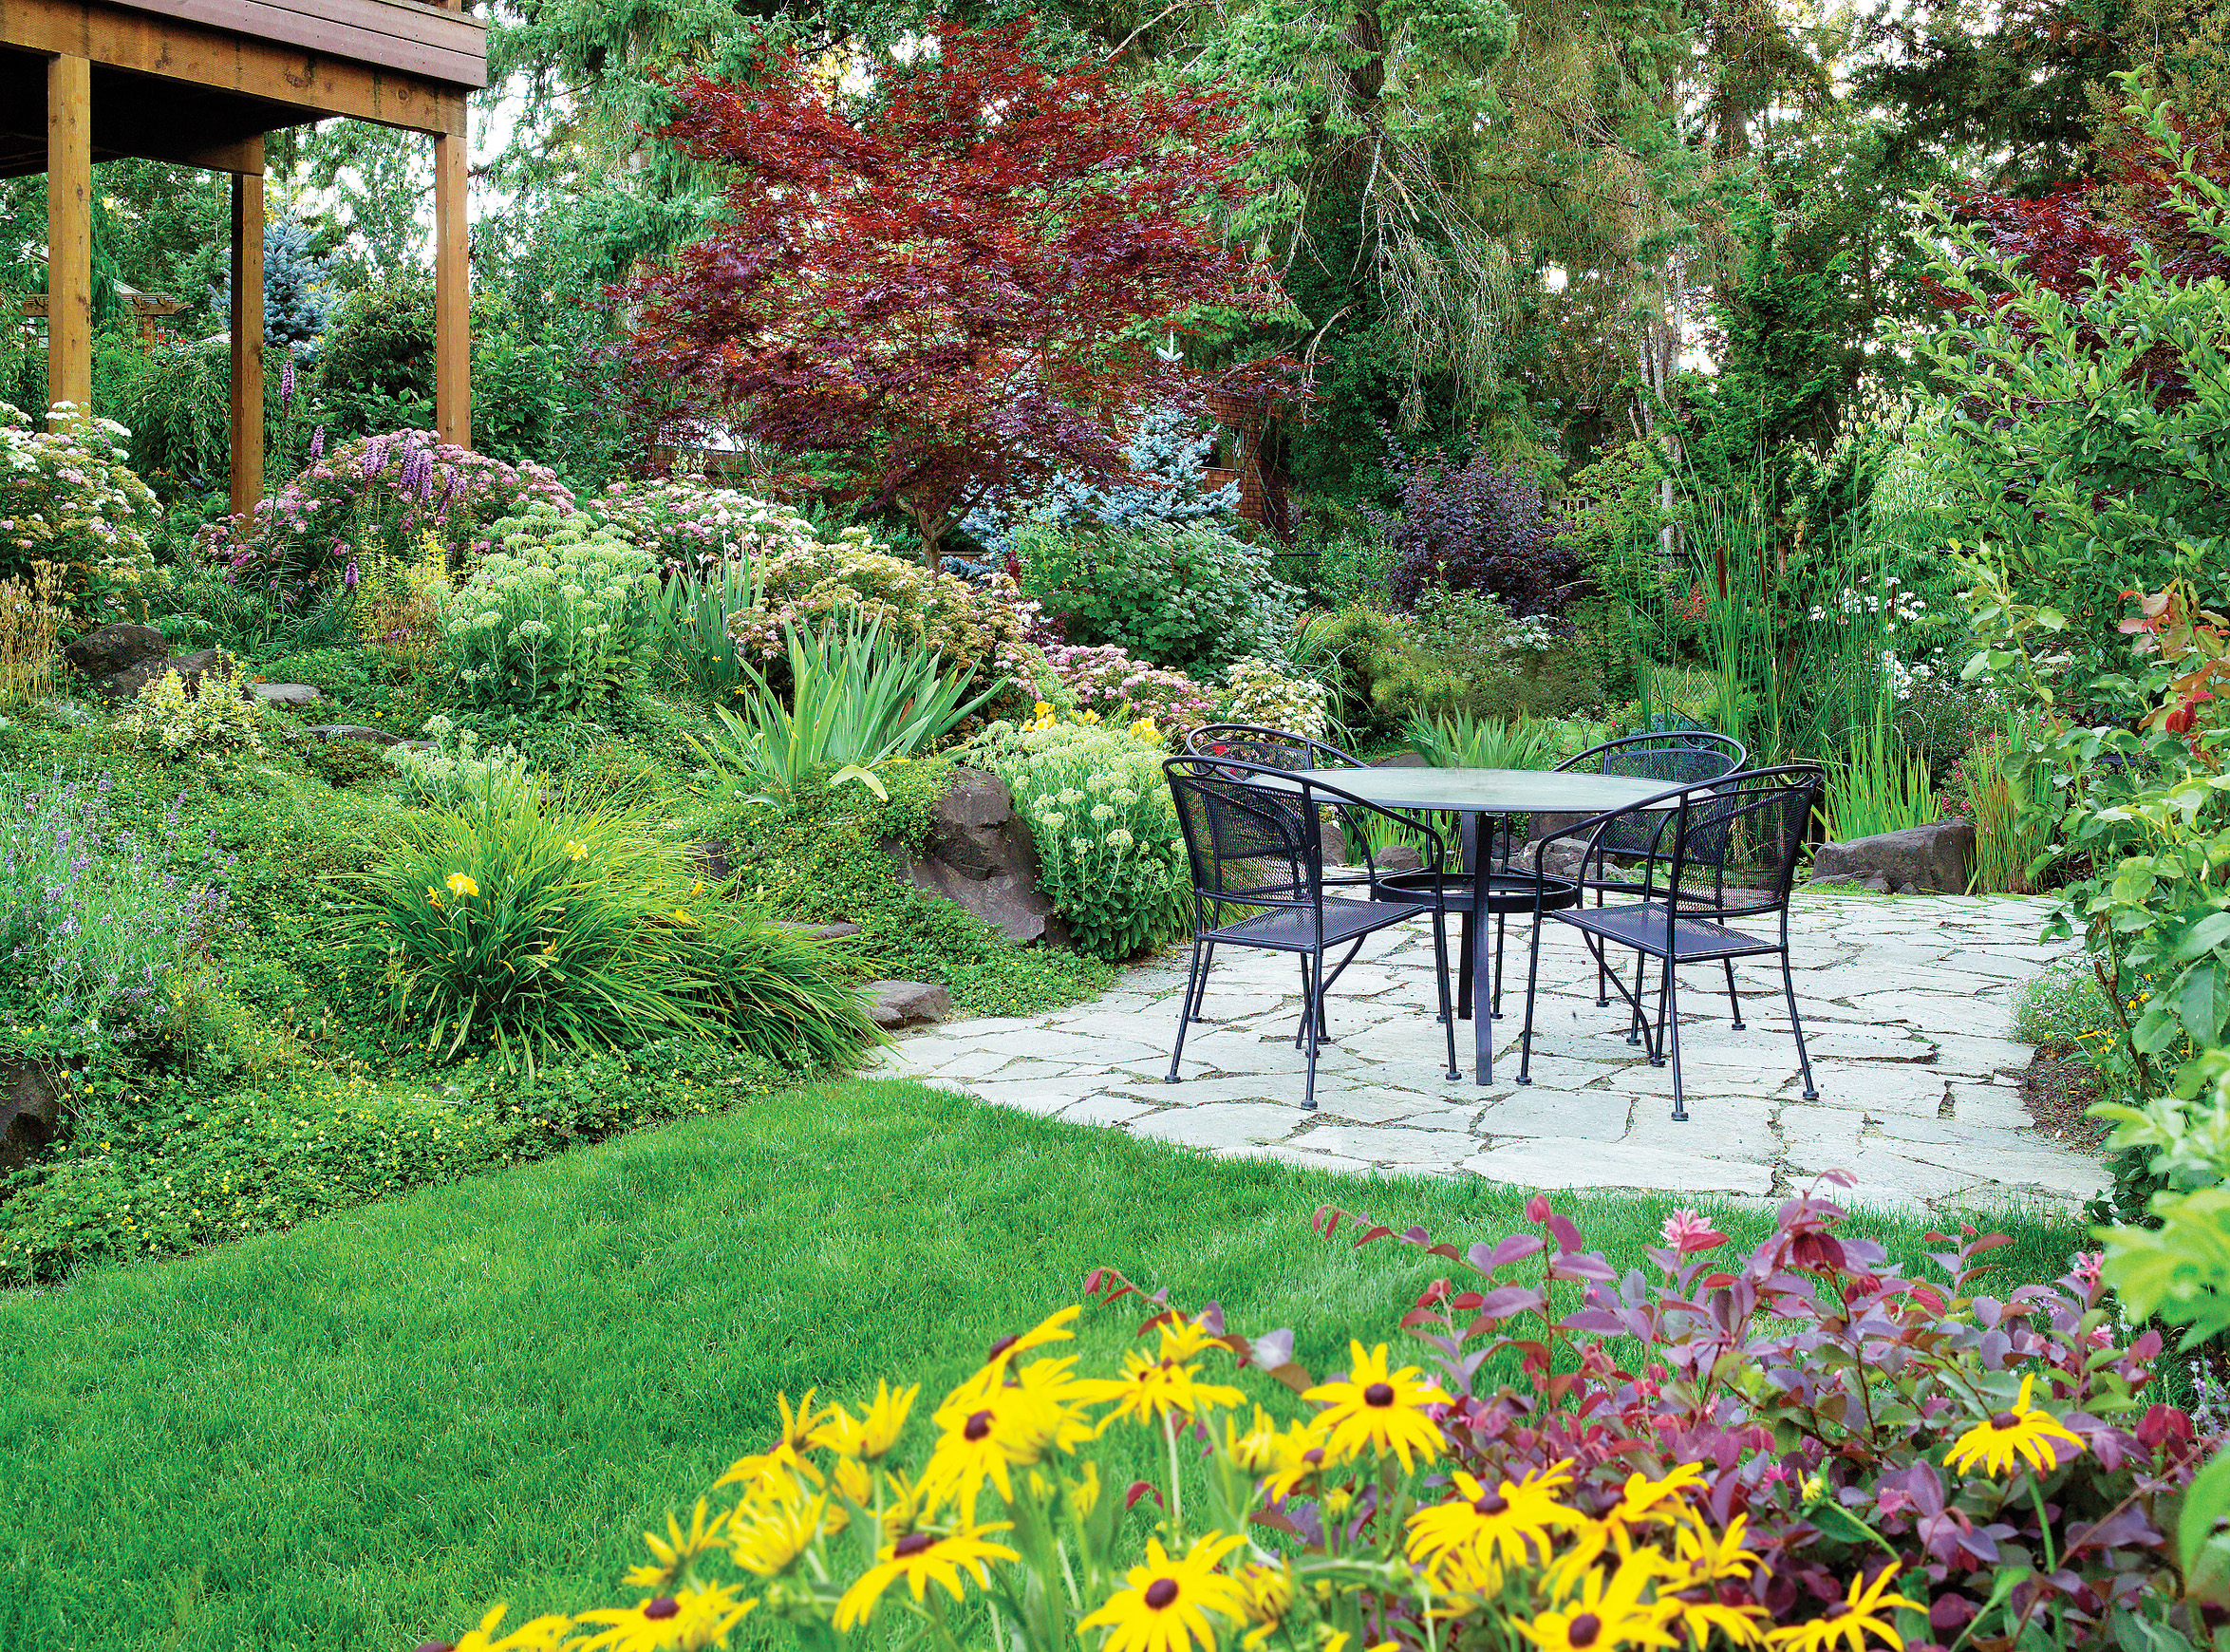 Terraces and plants make the most of a downhill garden. Here are 4